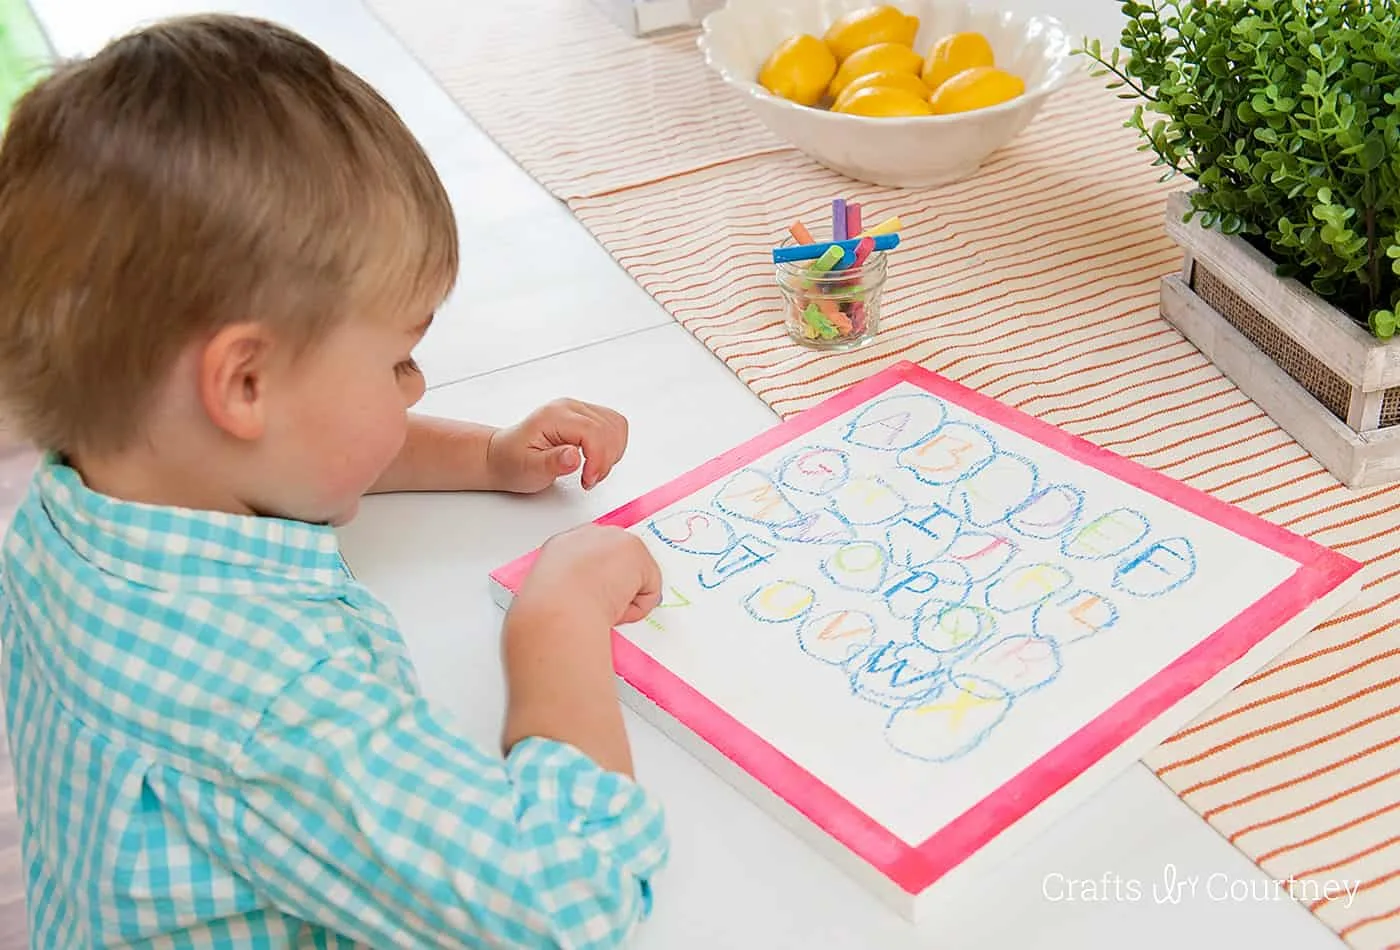 Child using colored chalk on top of a white chalkboard